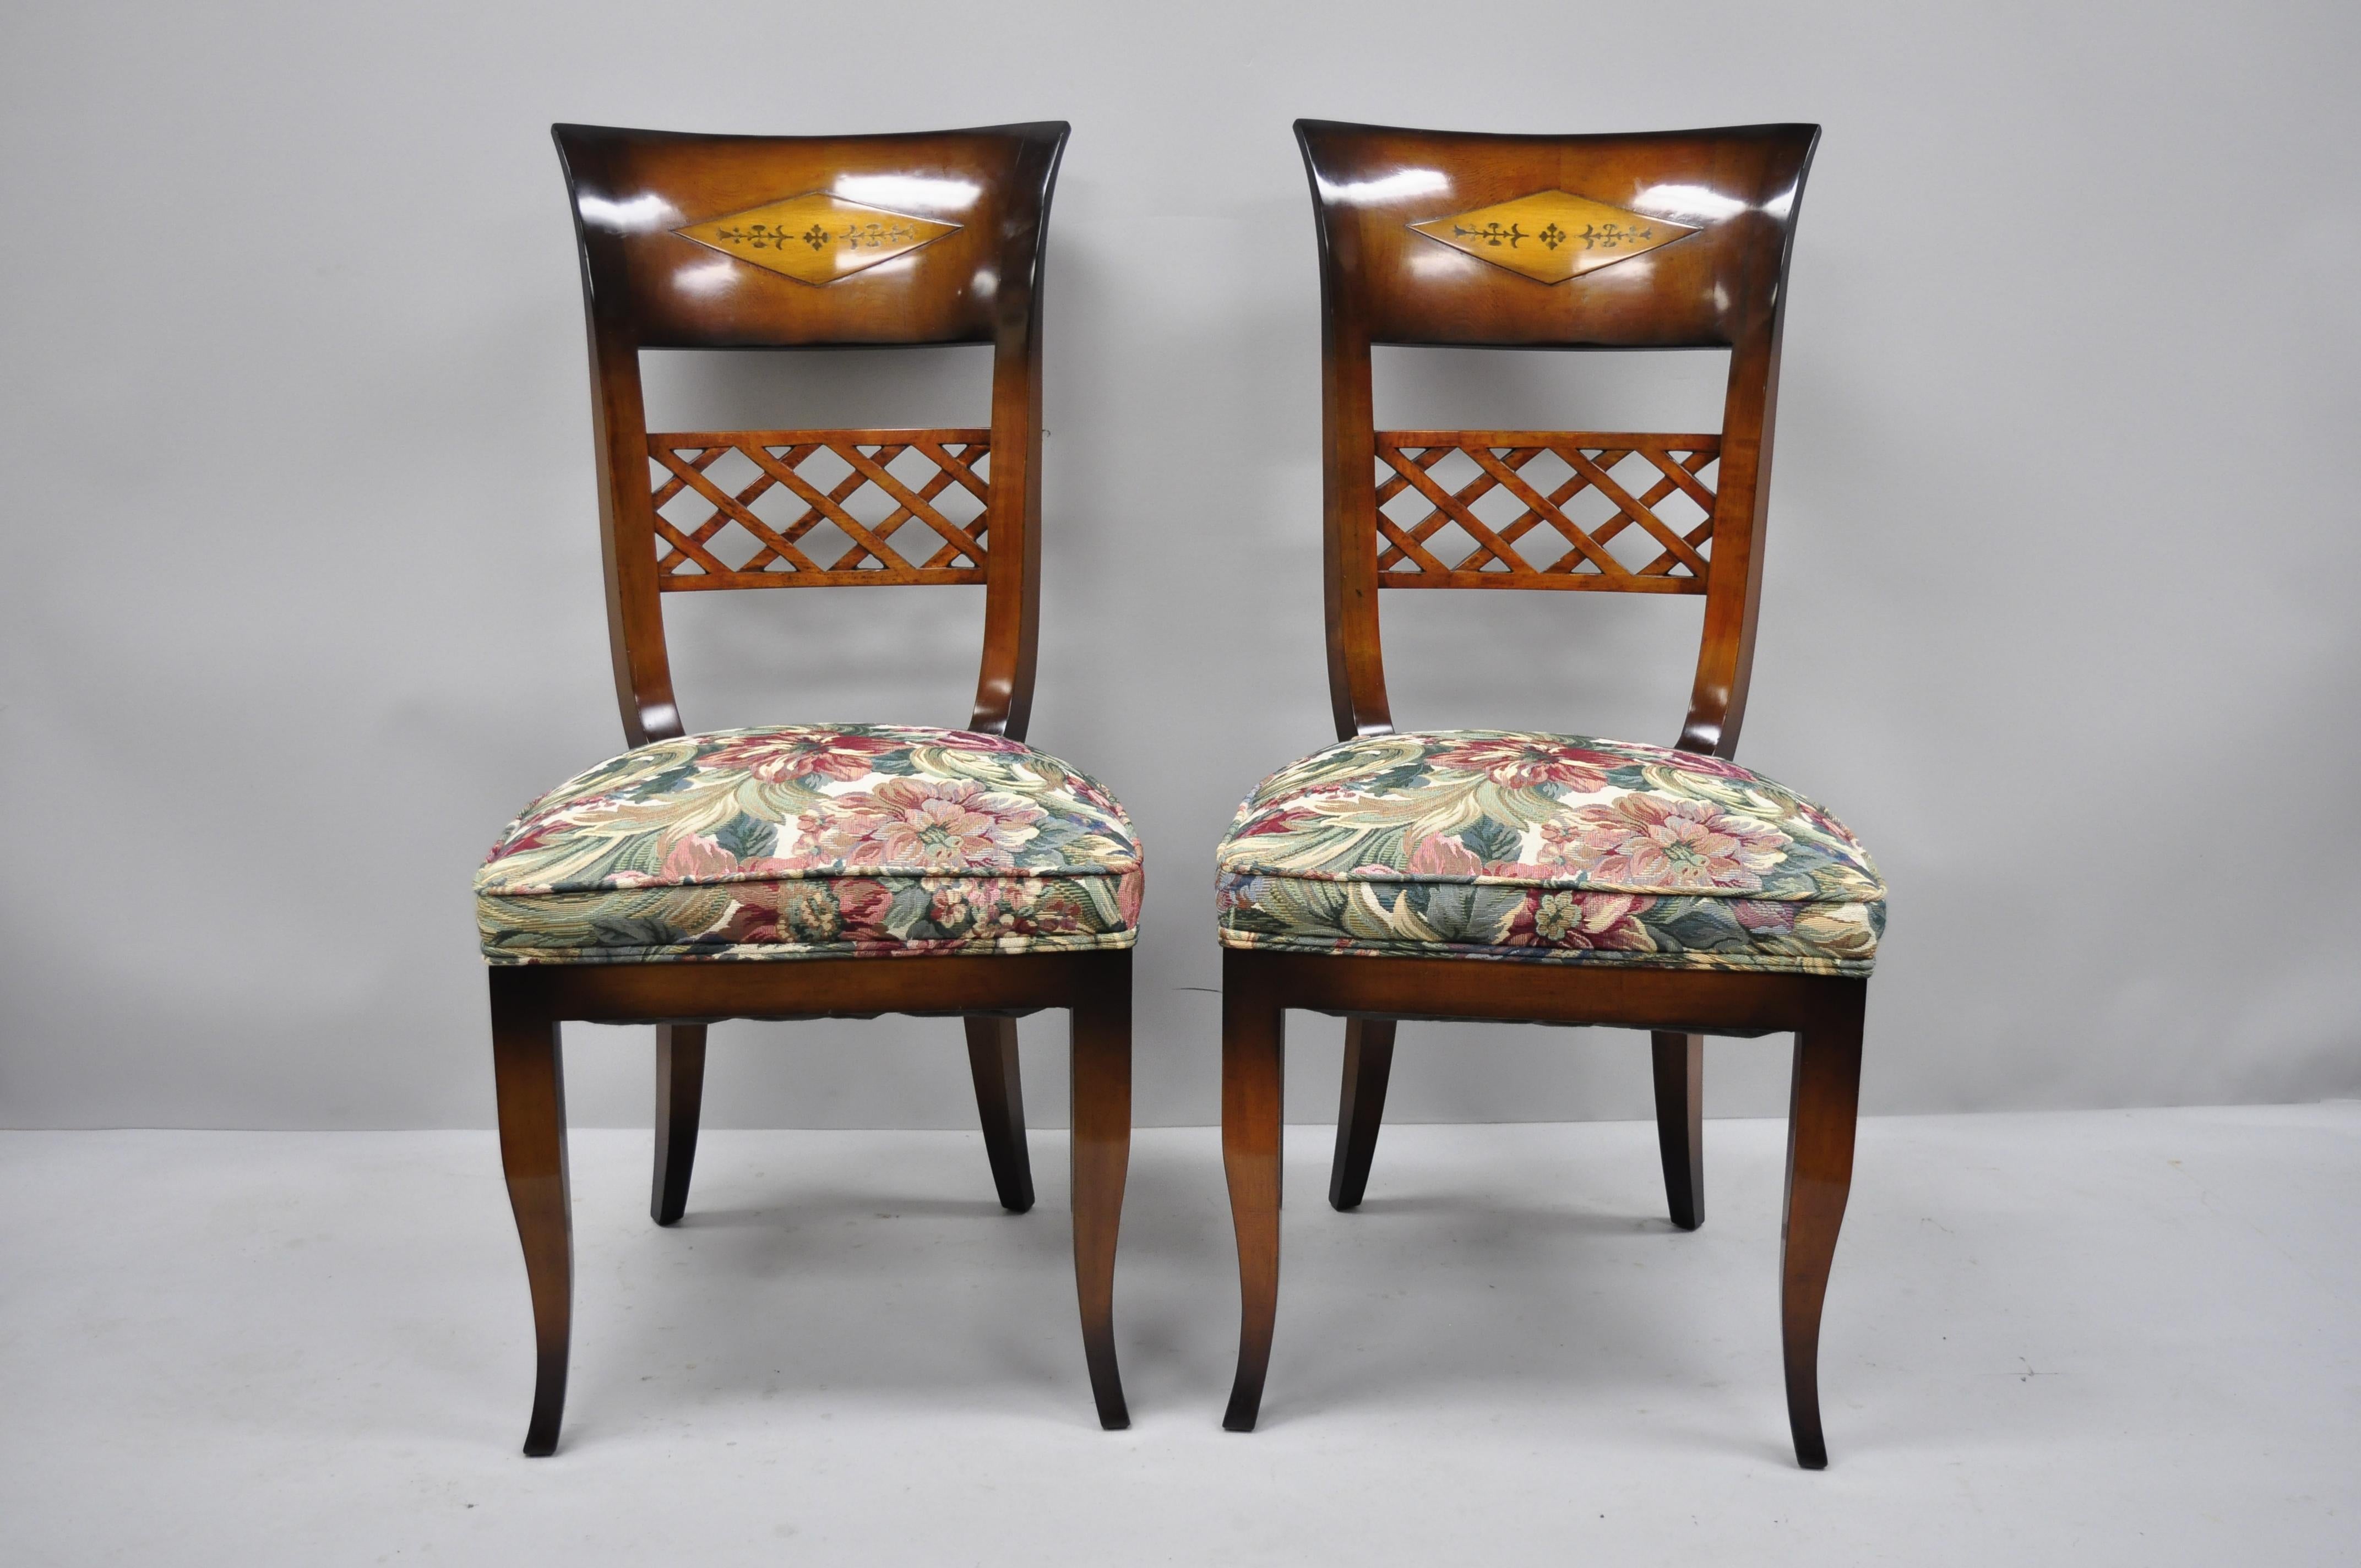 8 Italian neoclassical style high back lattice and brass inlay dining chairs. Listing includes 8 side chairs, brass inlay, lattice cutout, tall curved backs, solid wood construction, tapered legs, and great style and form, circa mid-20th century.